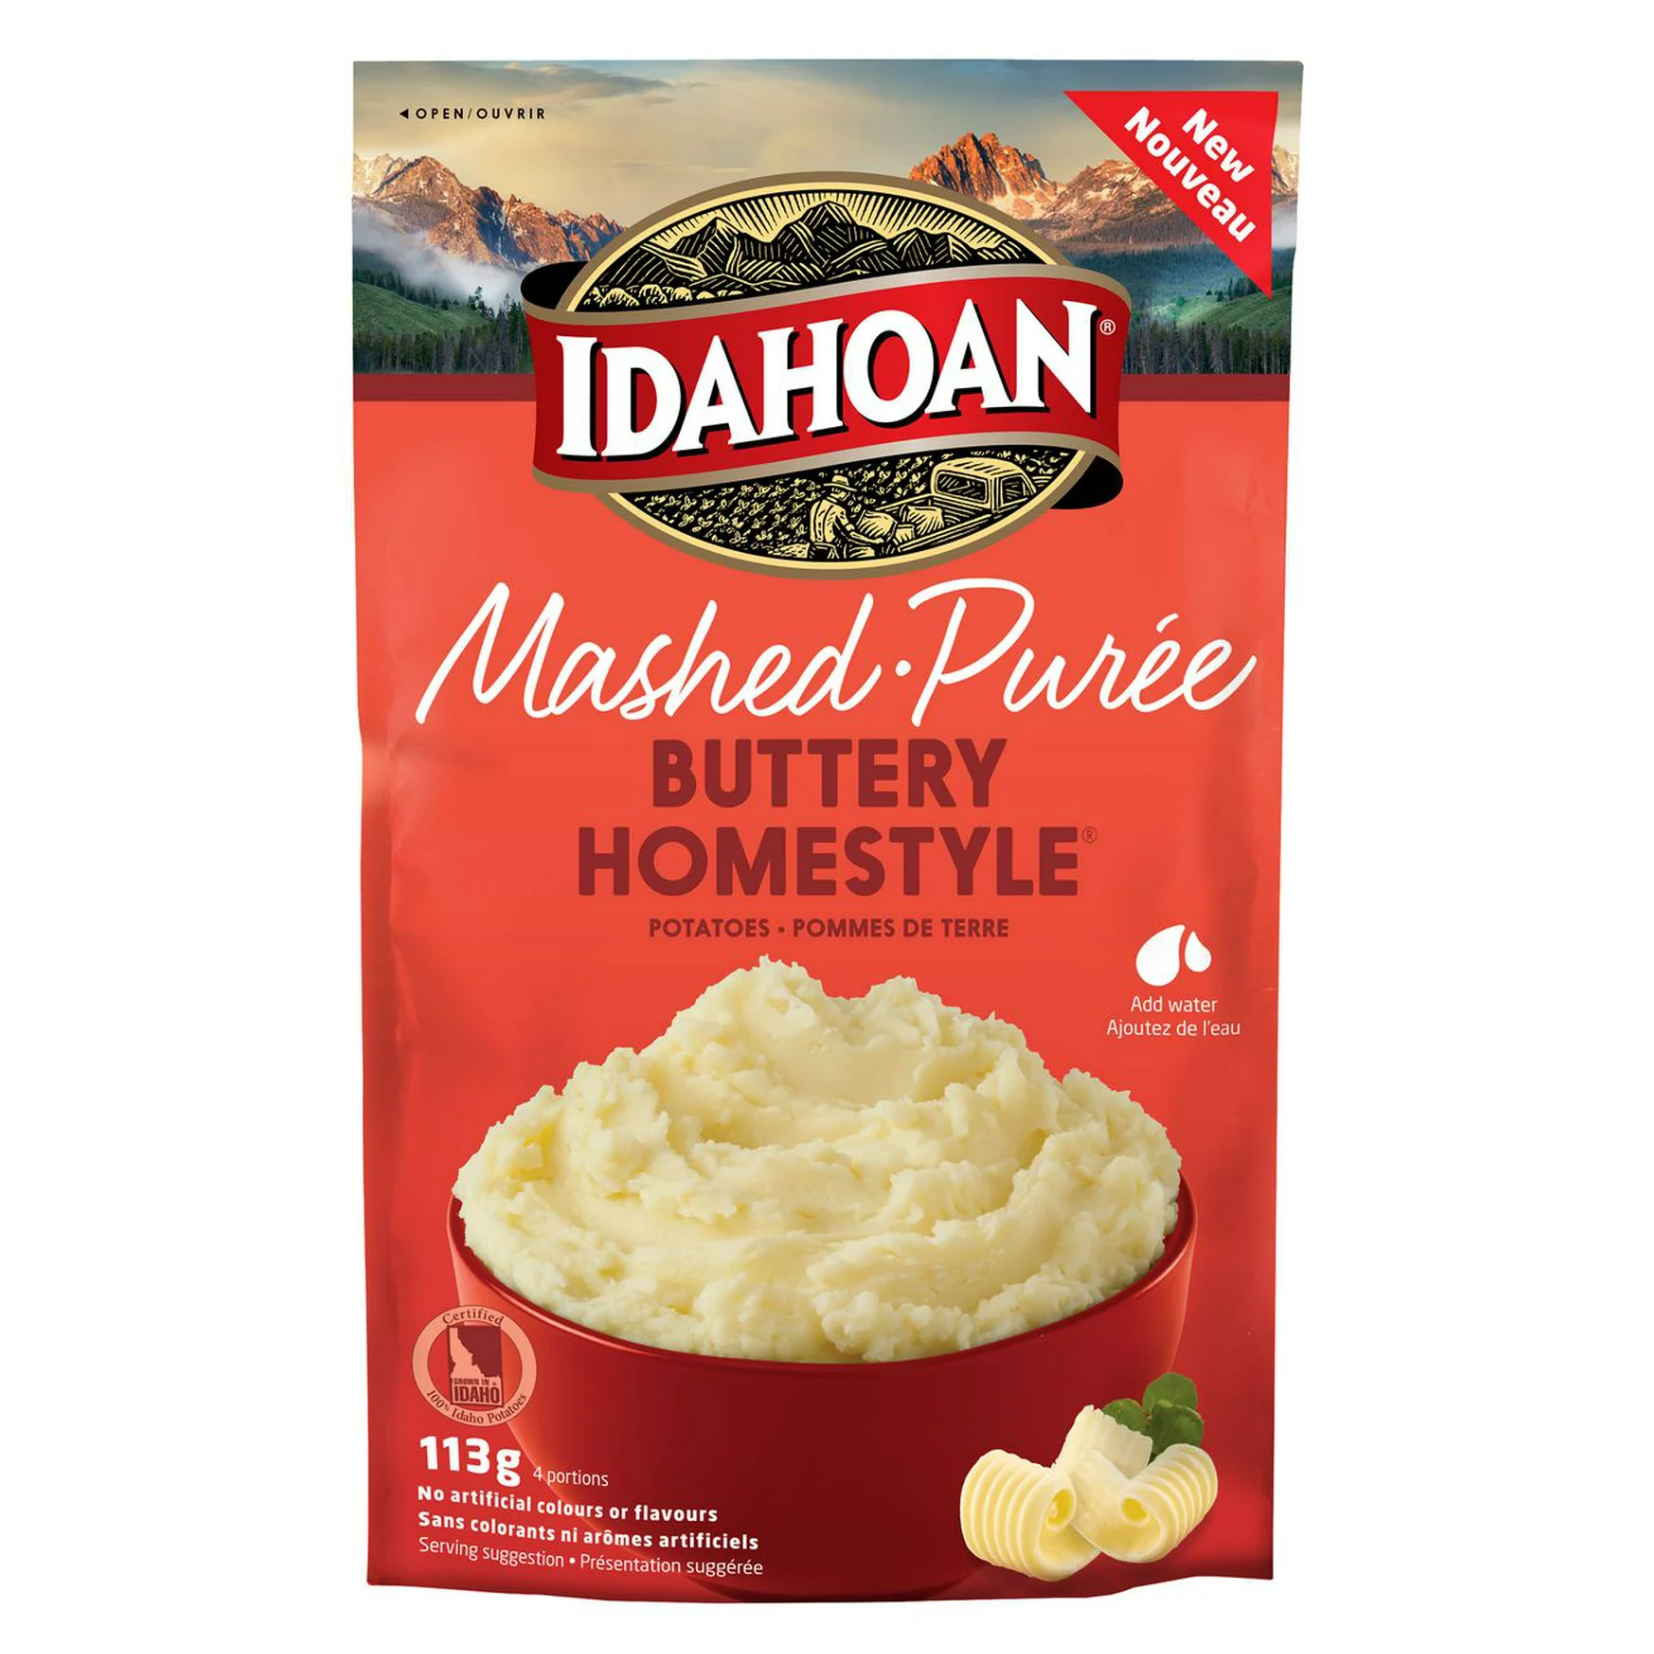 Idahoan Buttery Homestyle Flavored Mashed Potatoes 113g